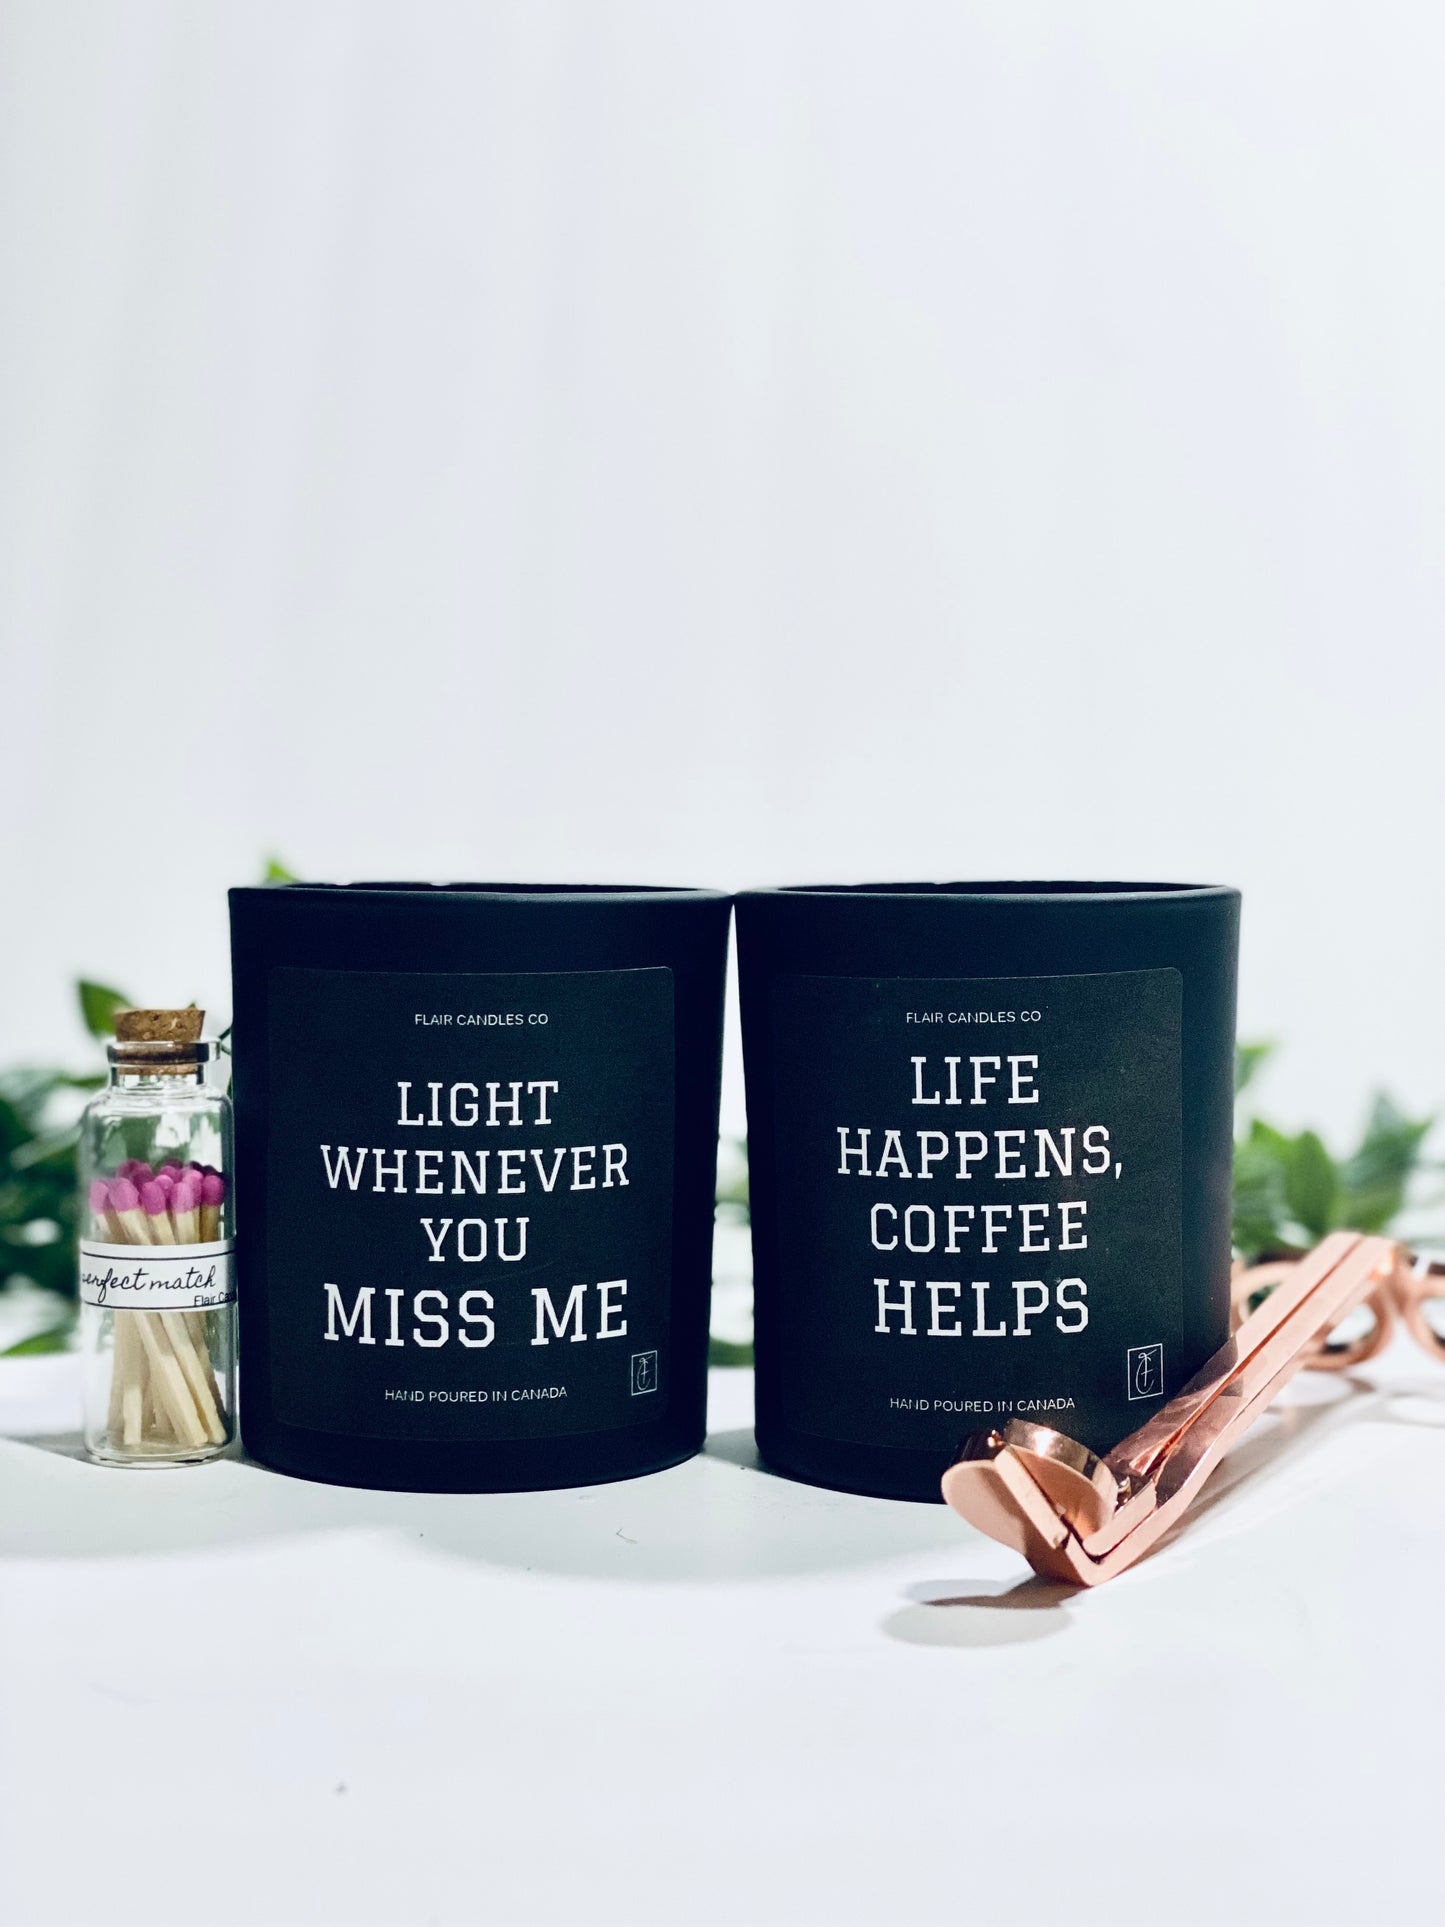 3 Quote Collection Candles + Wick Trimmer Bundle